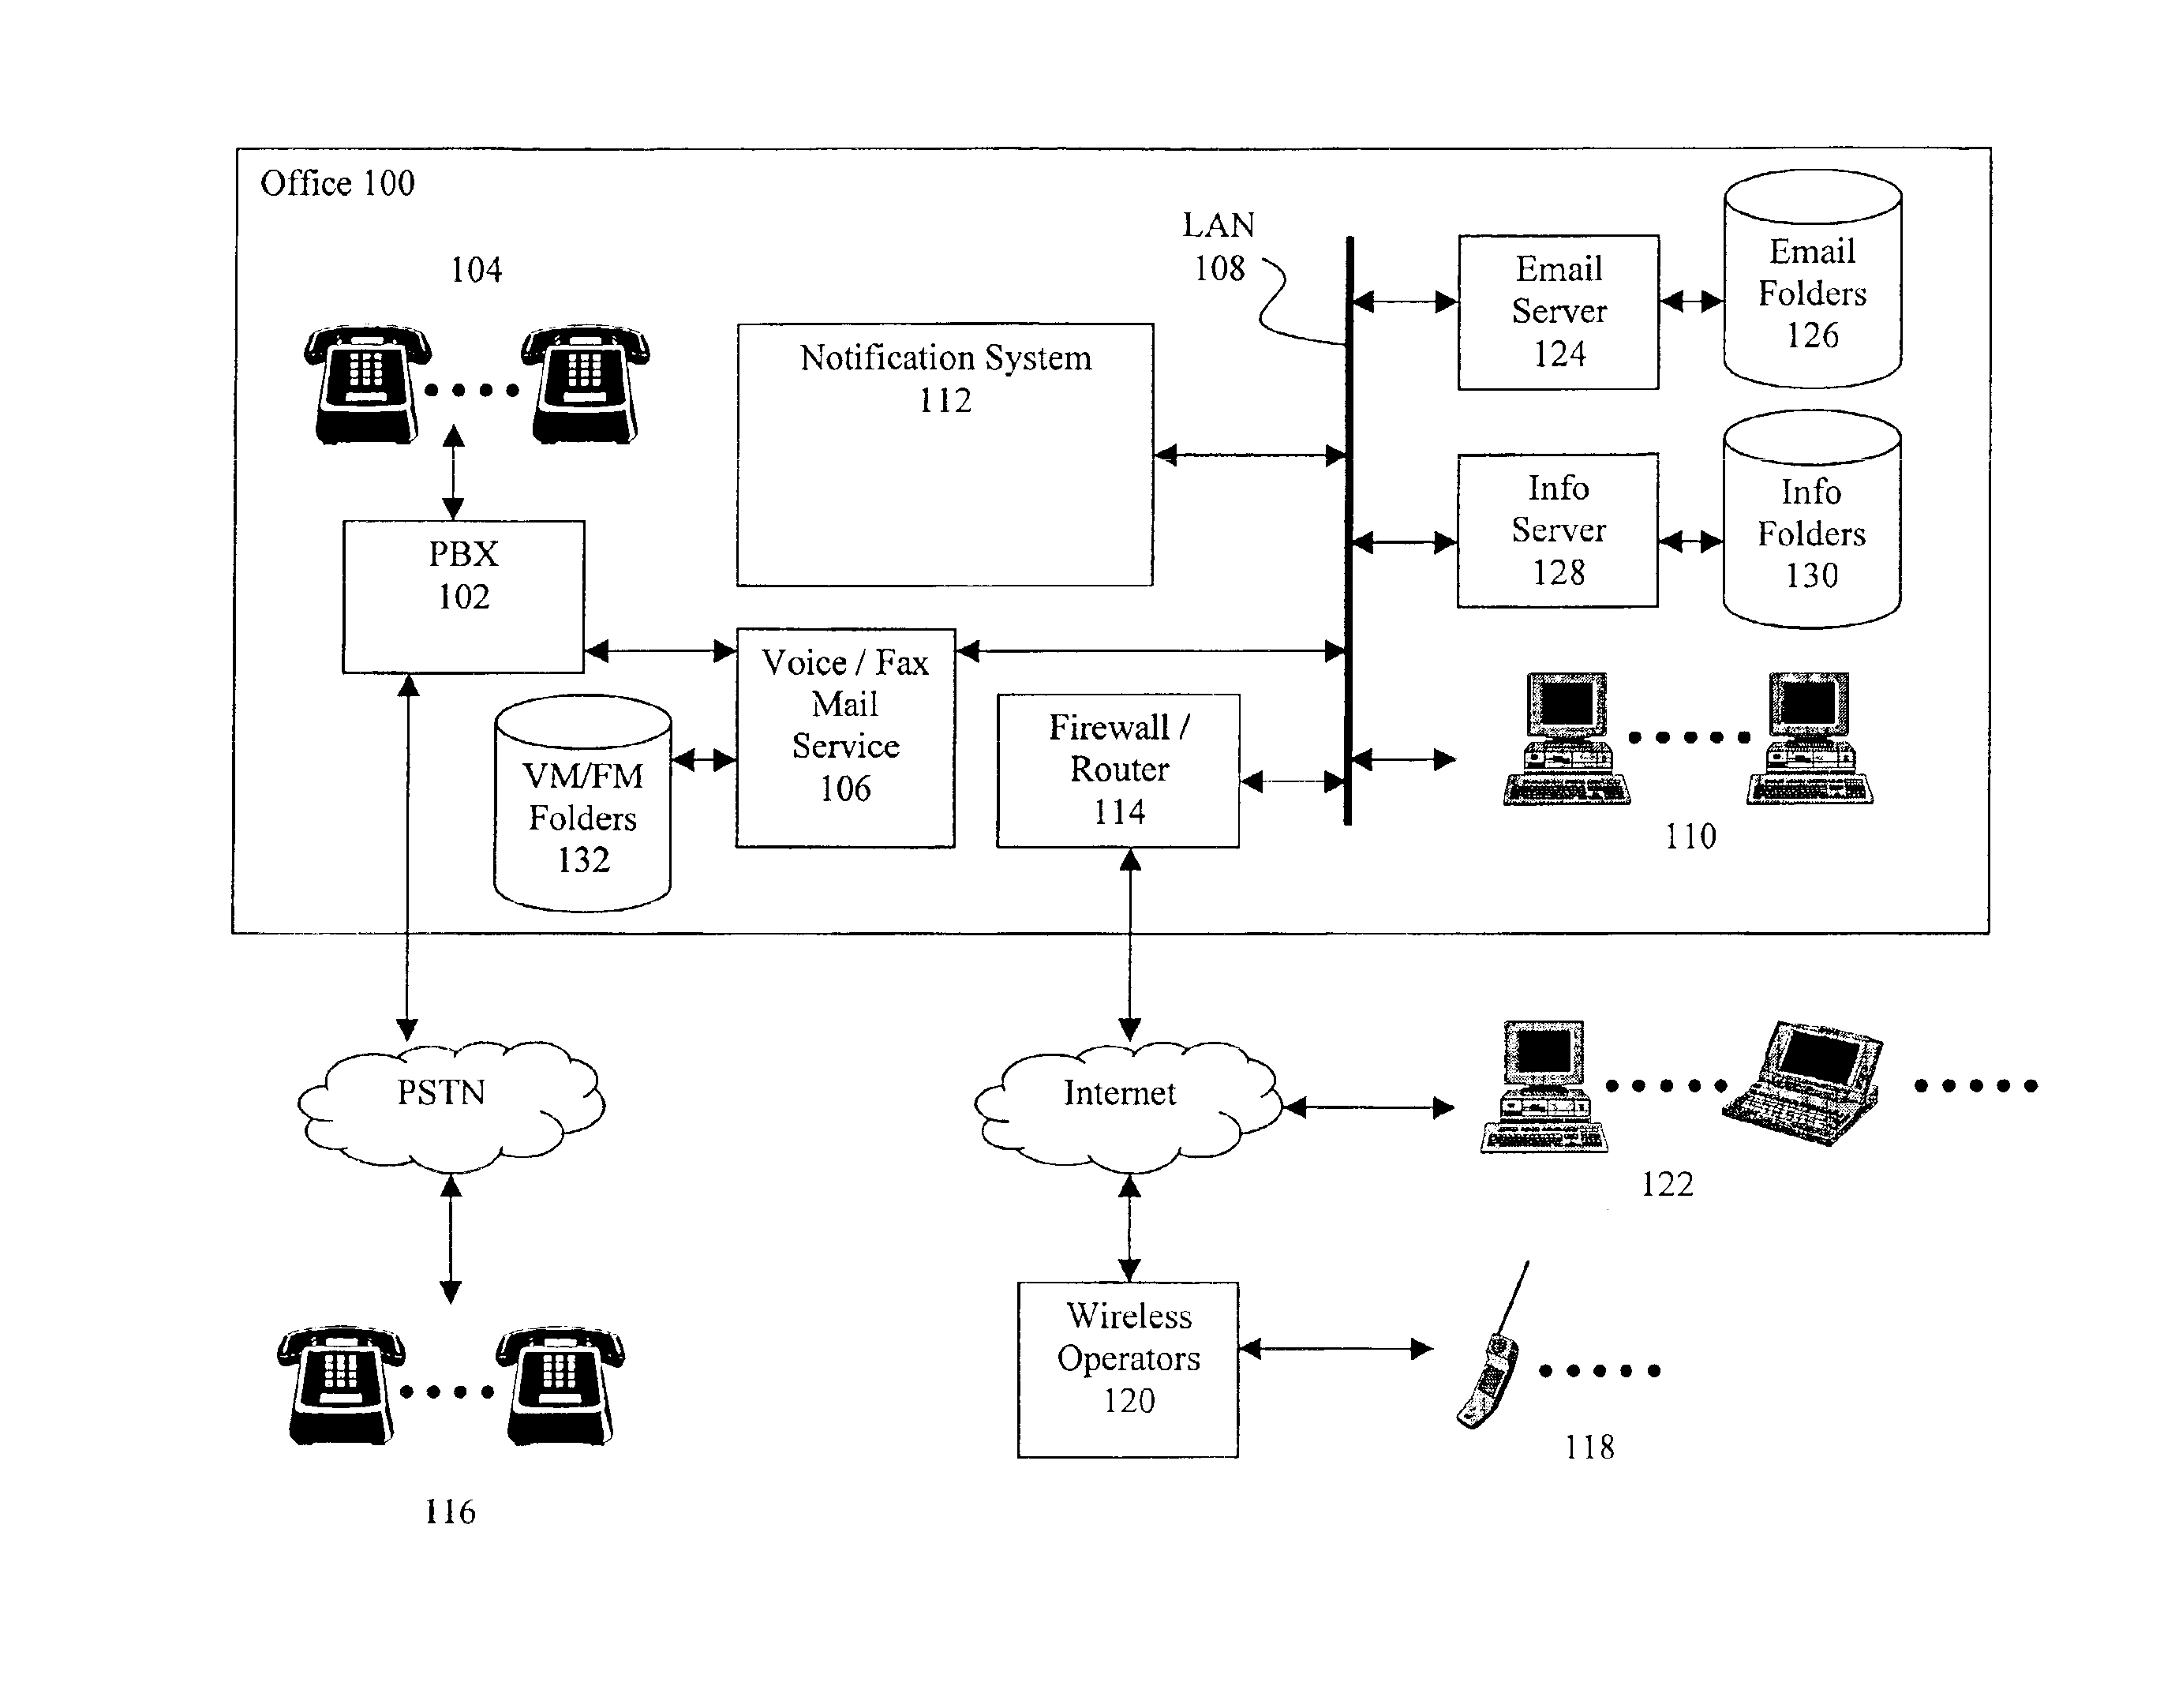 Generating and providing alert messages in a communications network